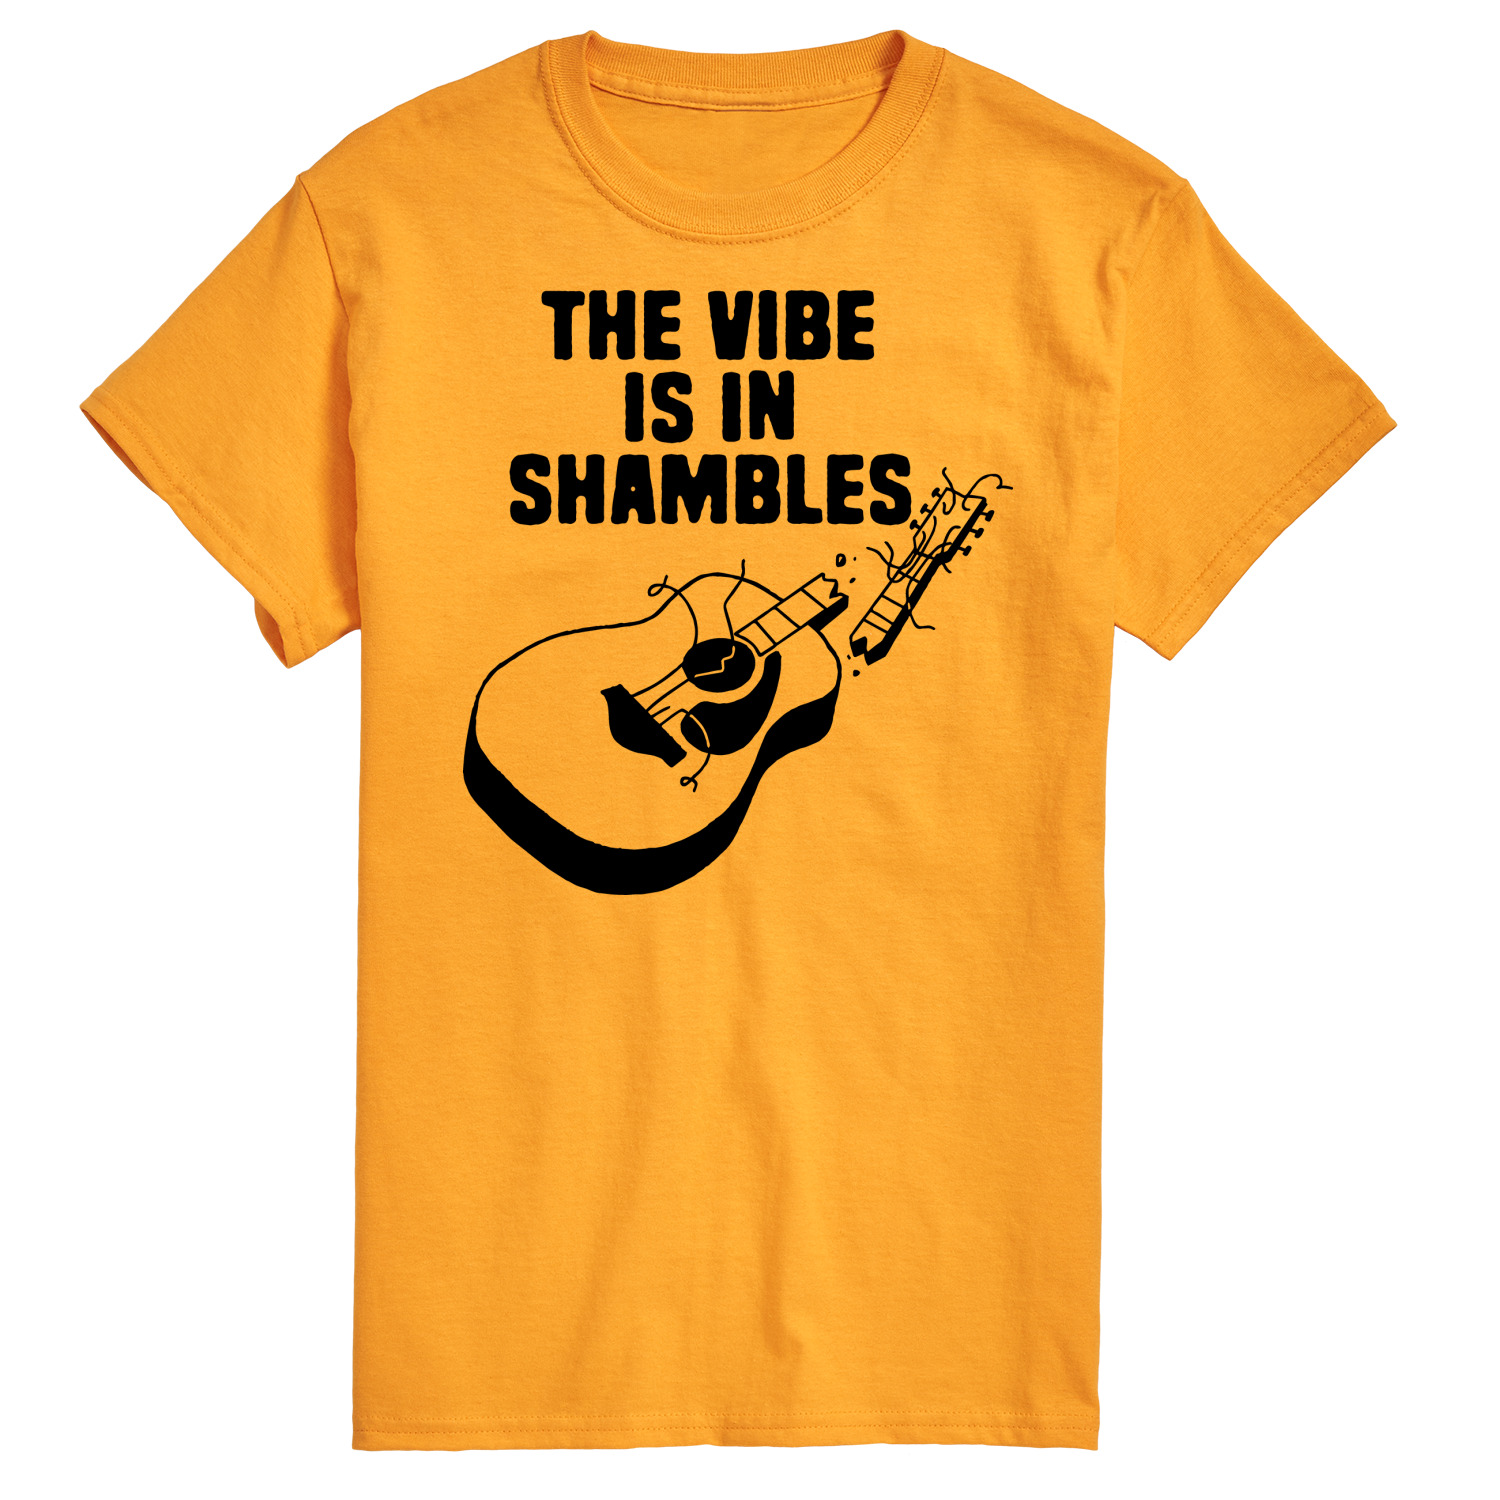 Instant Message - Vibe Is In Shambles - Men's Short Sleeve Graphic